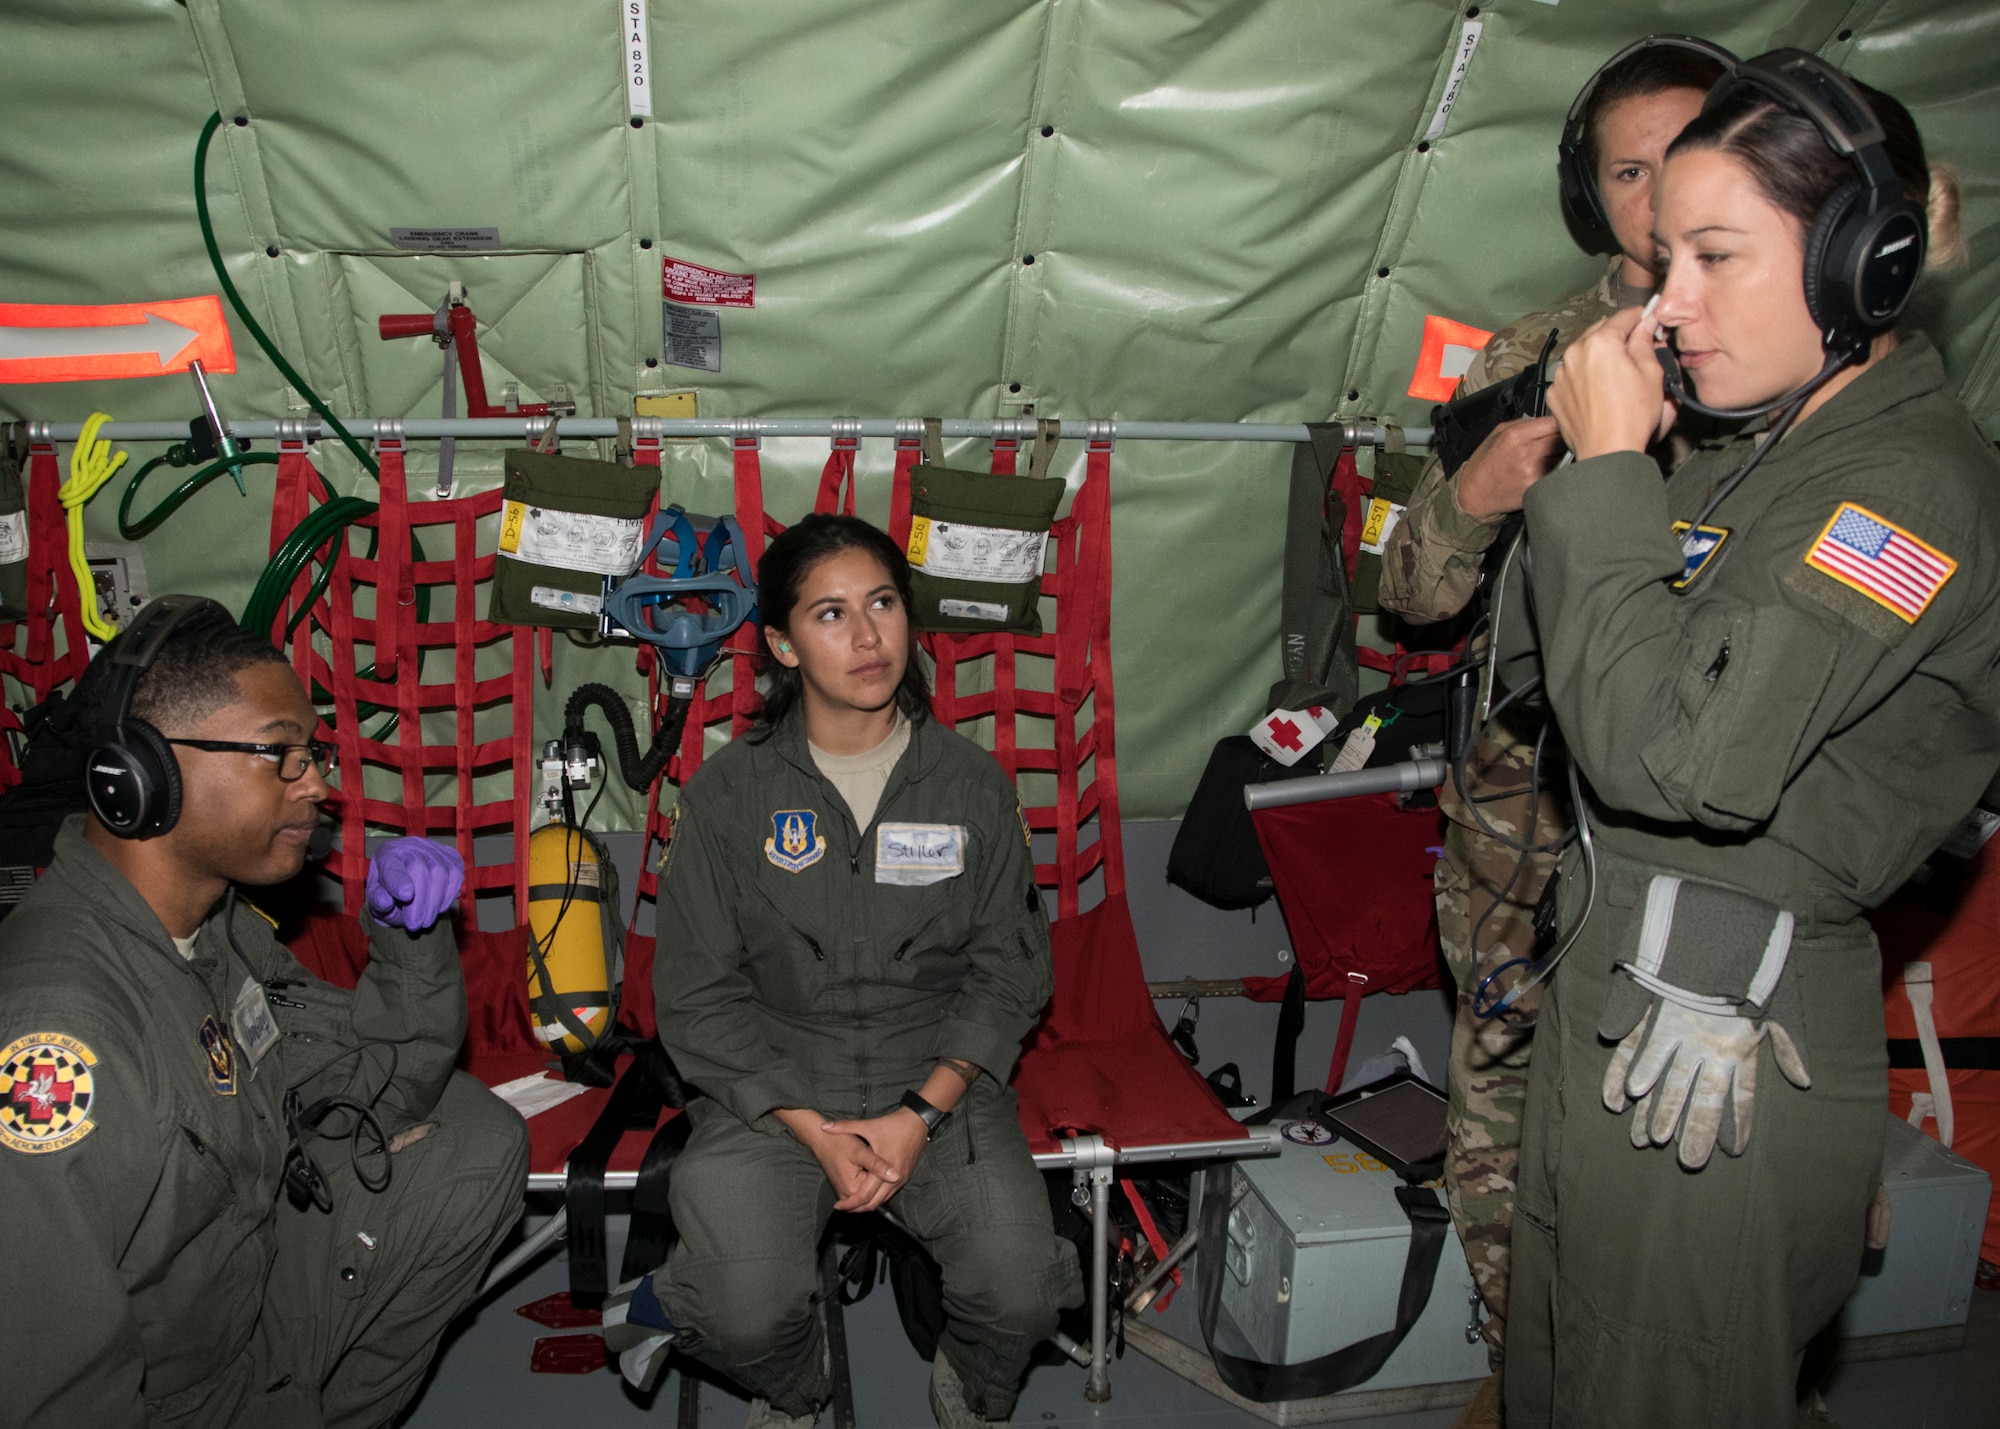 Master Sgt. Kat Hamblin, 459th Aeromedical Evacuation Squadron flight instructor, demonstrates how to properly measure a nasal gastric tube during an off station trainer on a KC-135 Stratotanker Sept. 20, 2019. The team participates in local and off station training missions about twice a month to ensure humanitarian and deployment mission readiness. (U.S. Air Force photo by Staff Sgt. Cierra Presentado/Released)